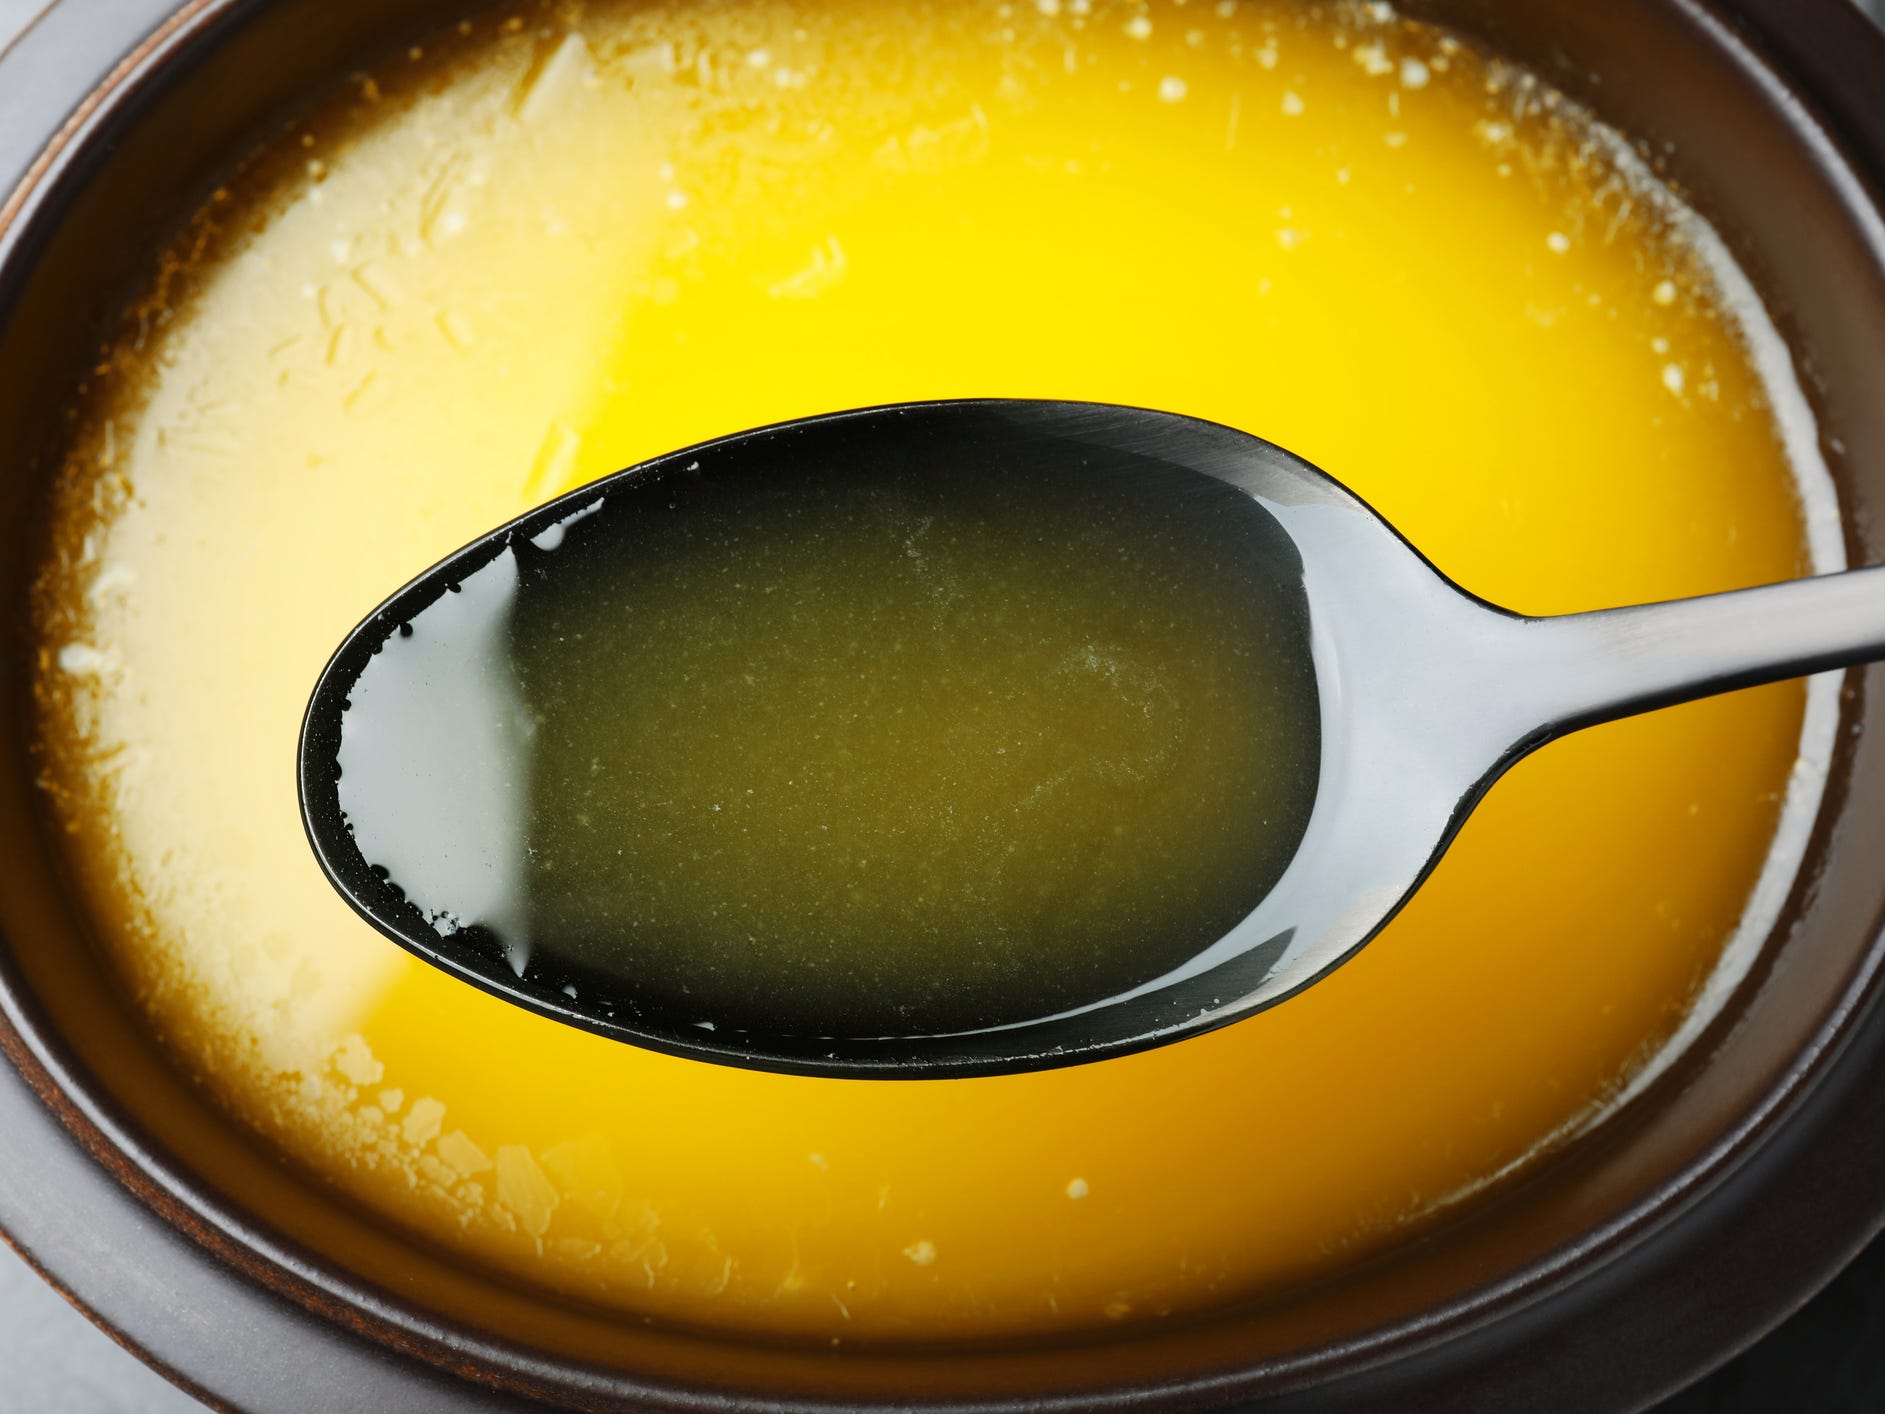 Spoon of clarified butter over bowl.